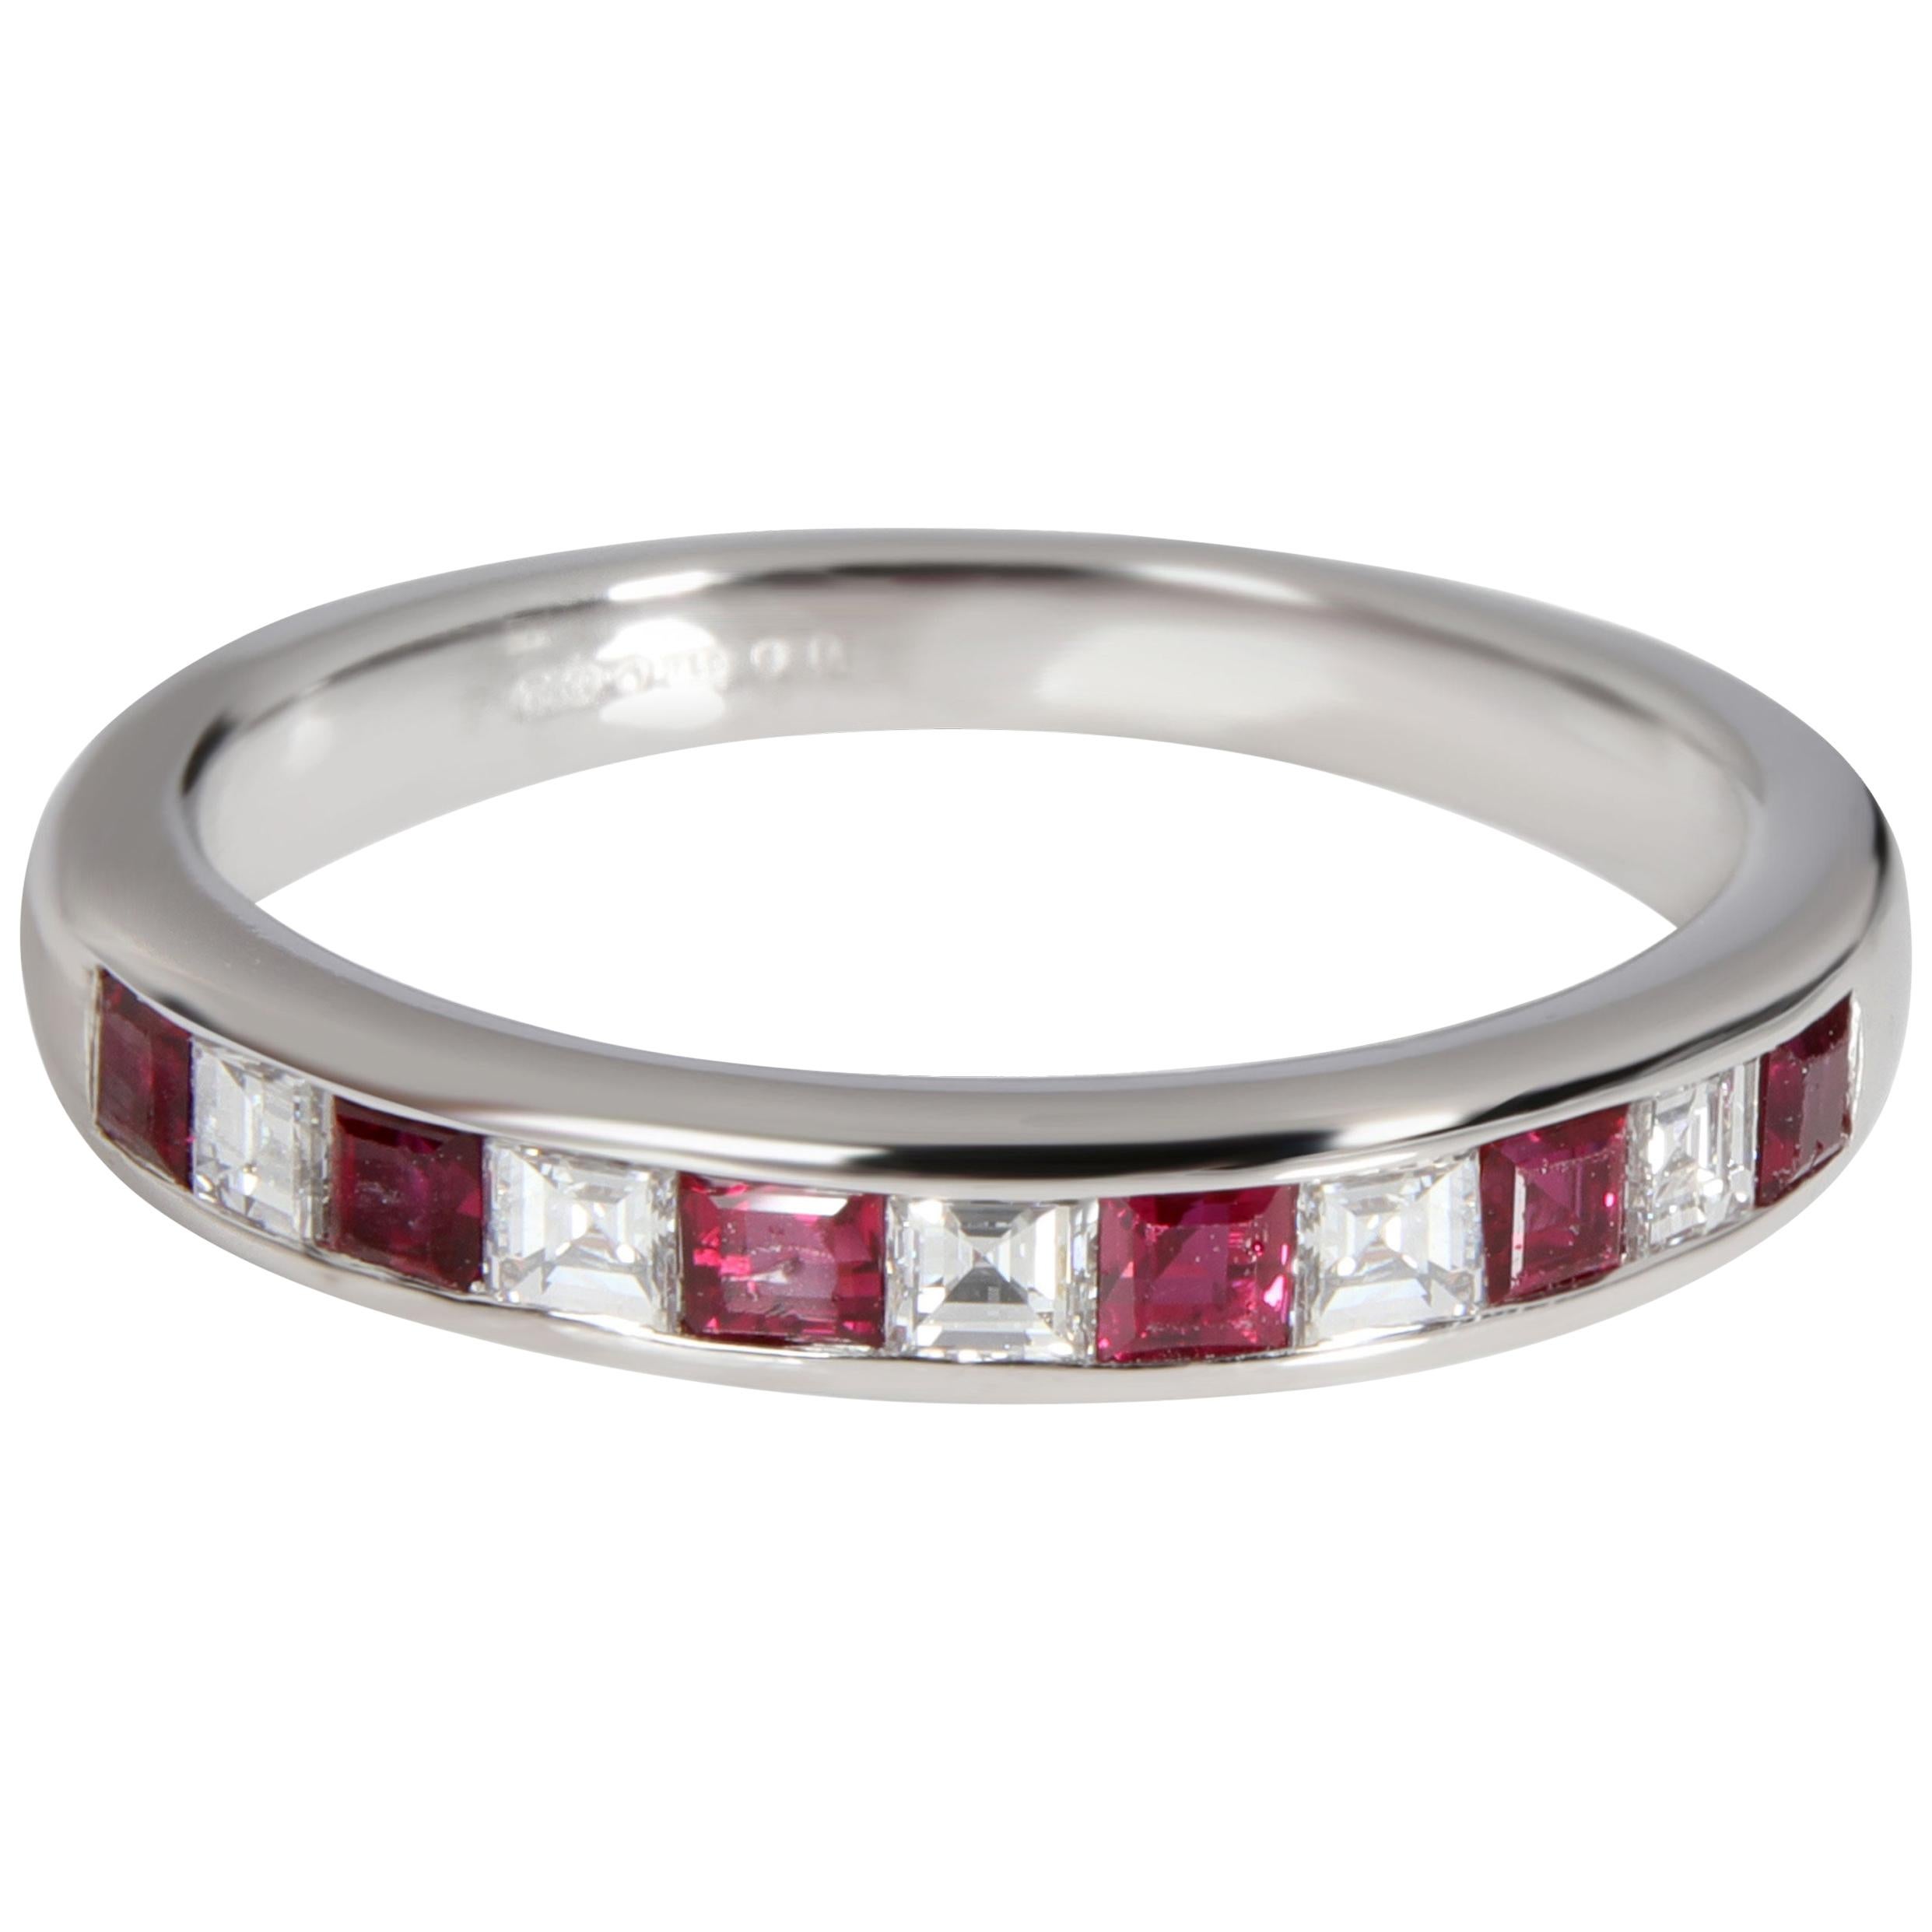 Tiffany & Co. Channel Set Ruby Diamond Band in Platinum 0.25 Carat